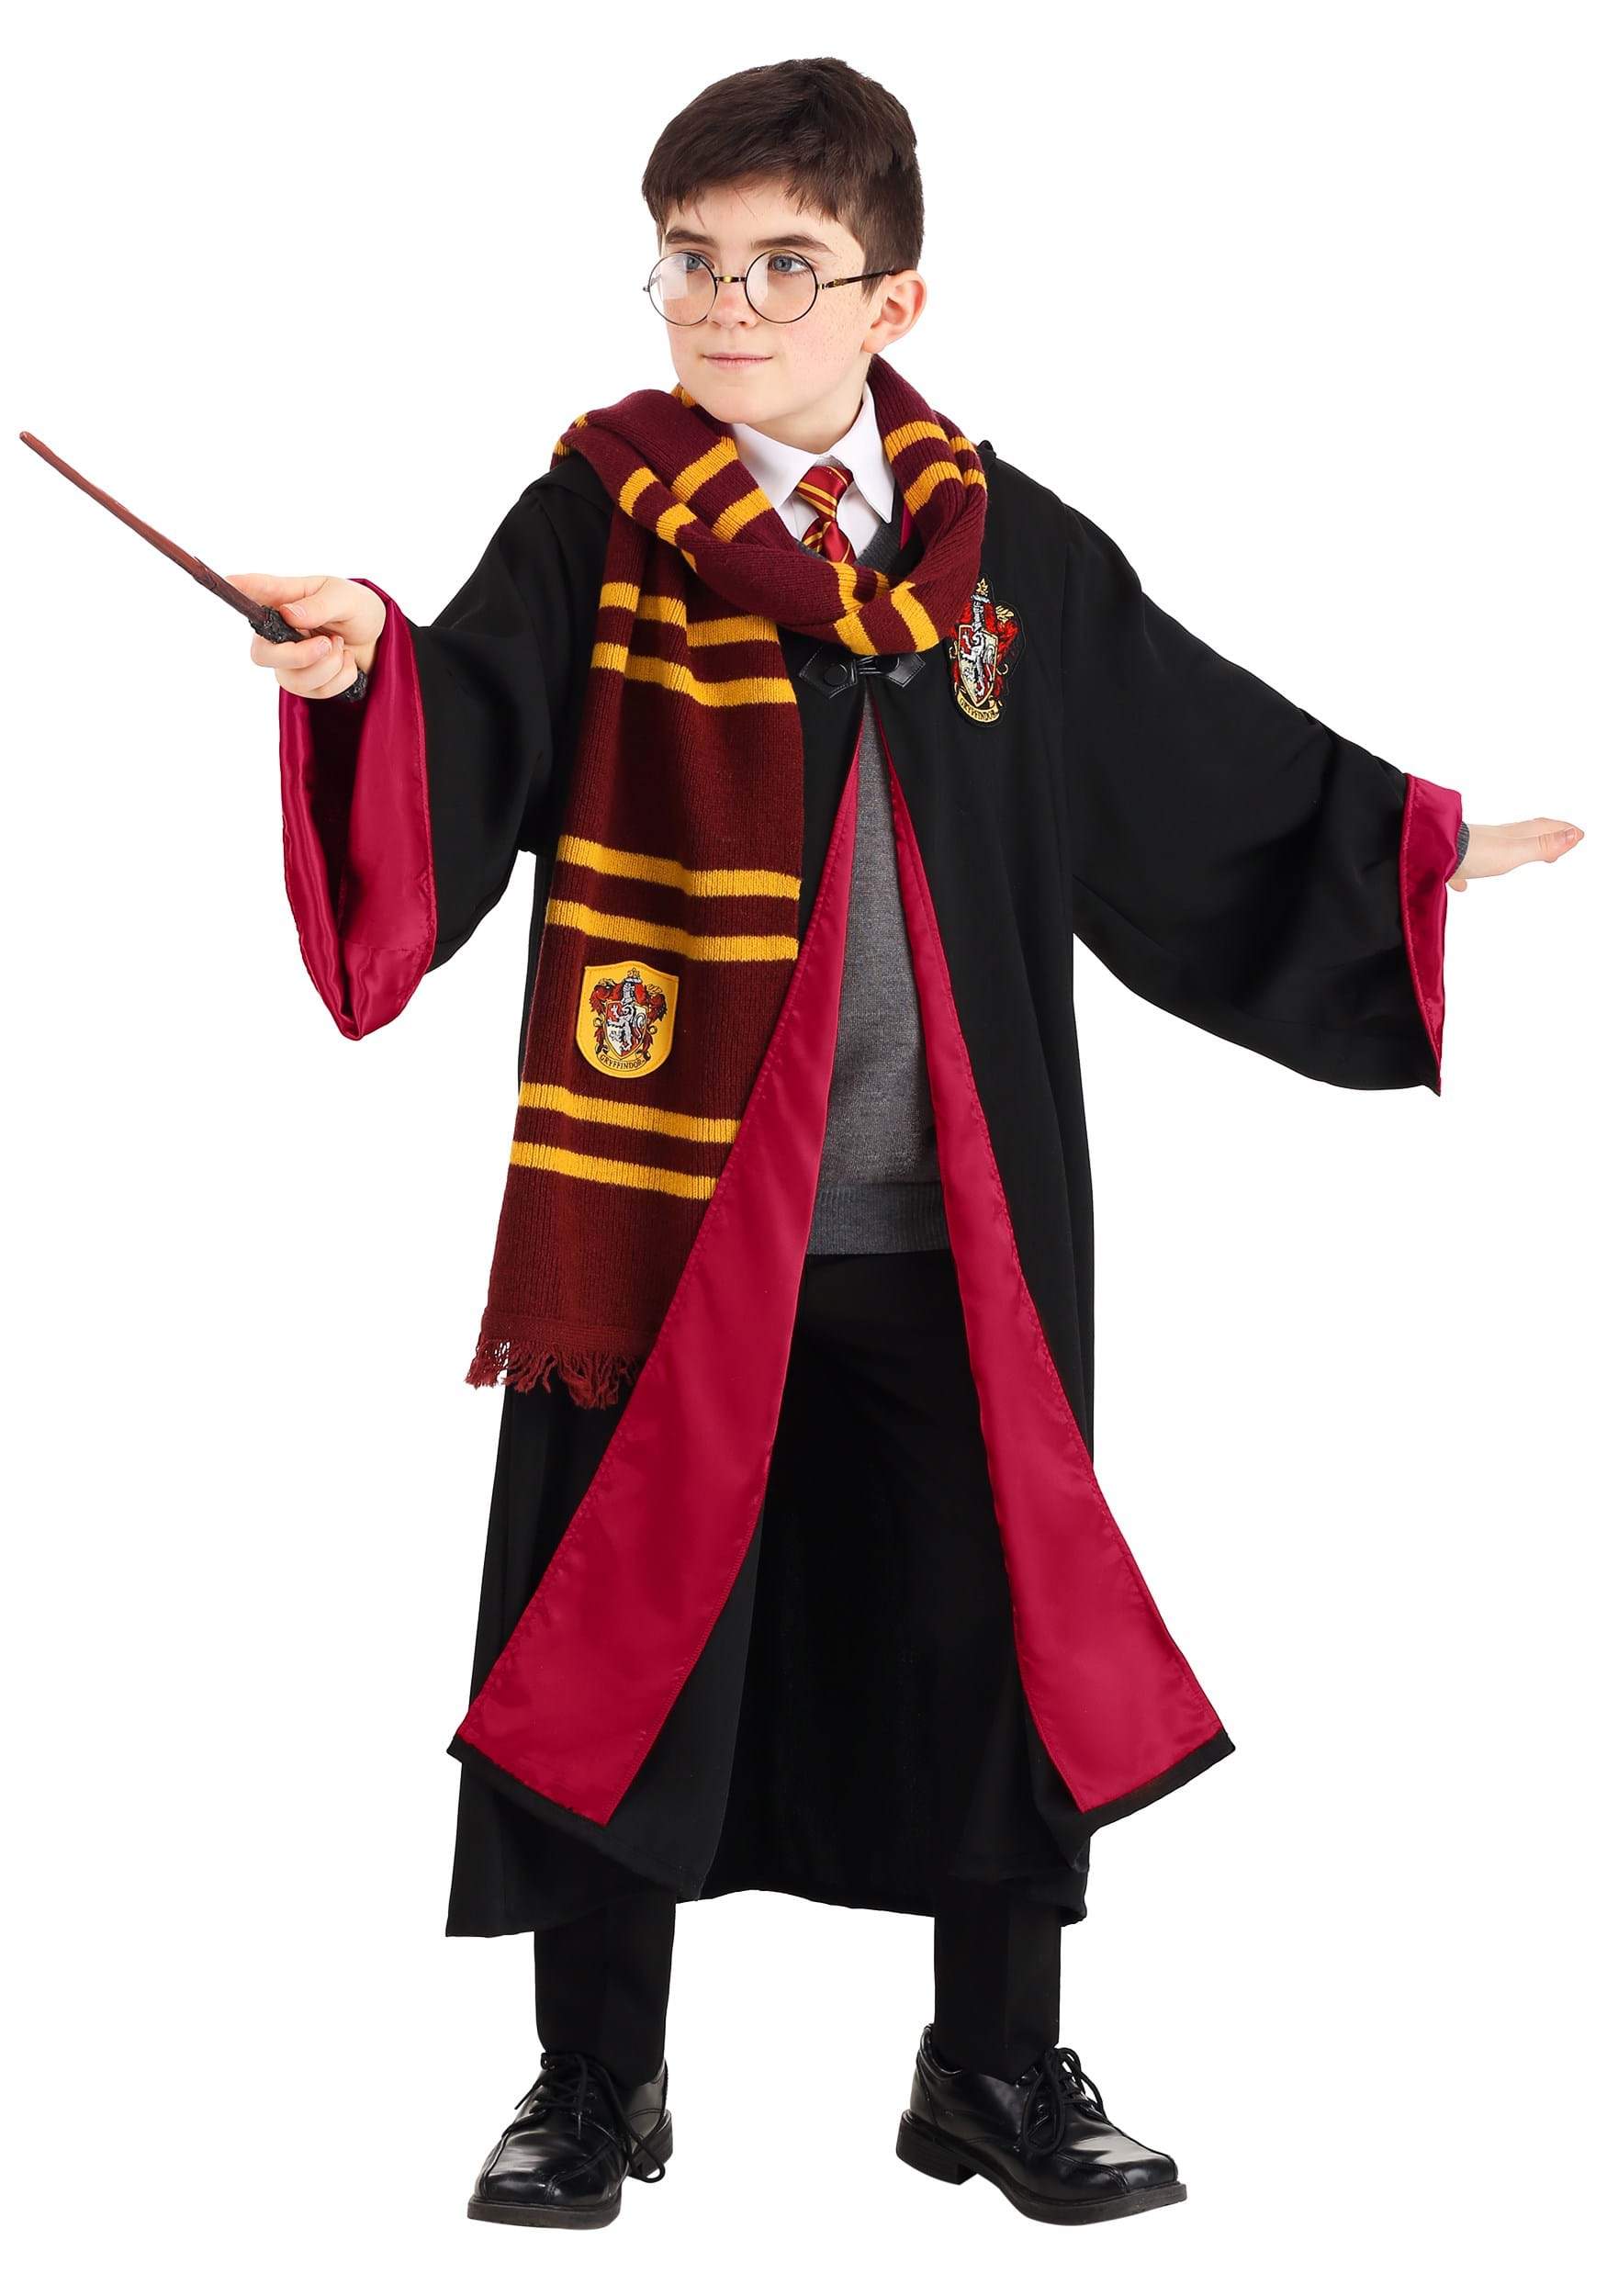 How to dress up as harry potter for halloween | ann's blog